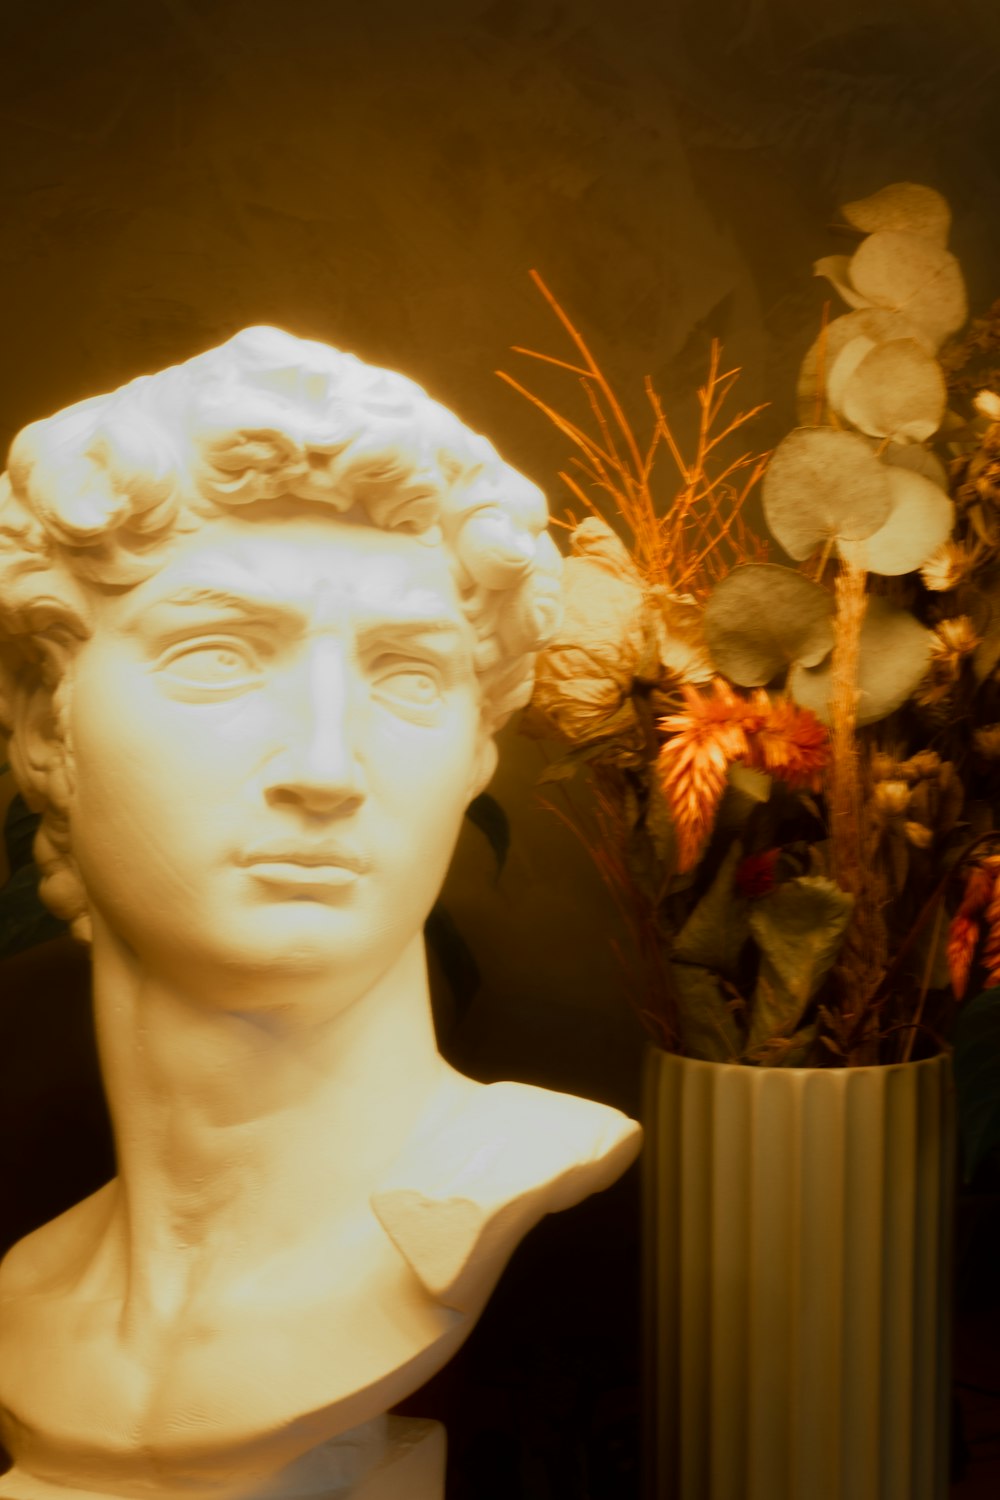 a bust of a man next to a vase of flowers